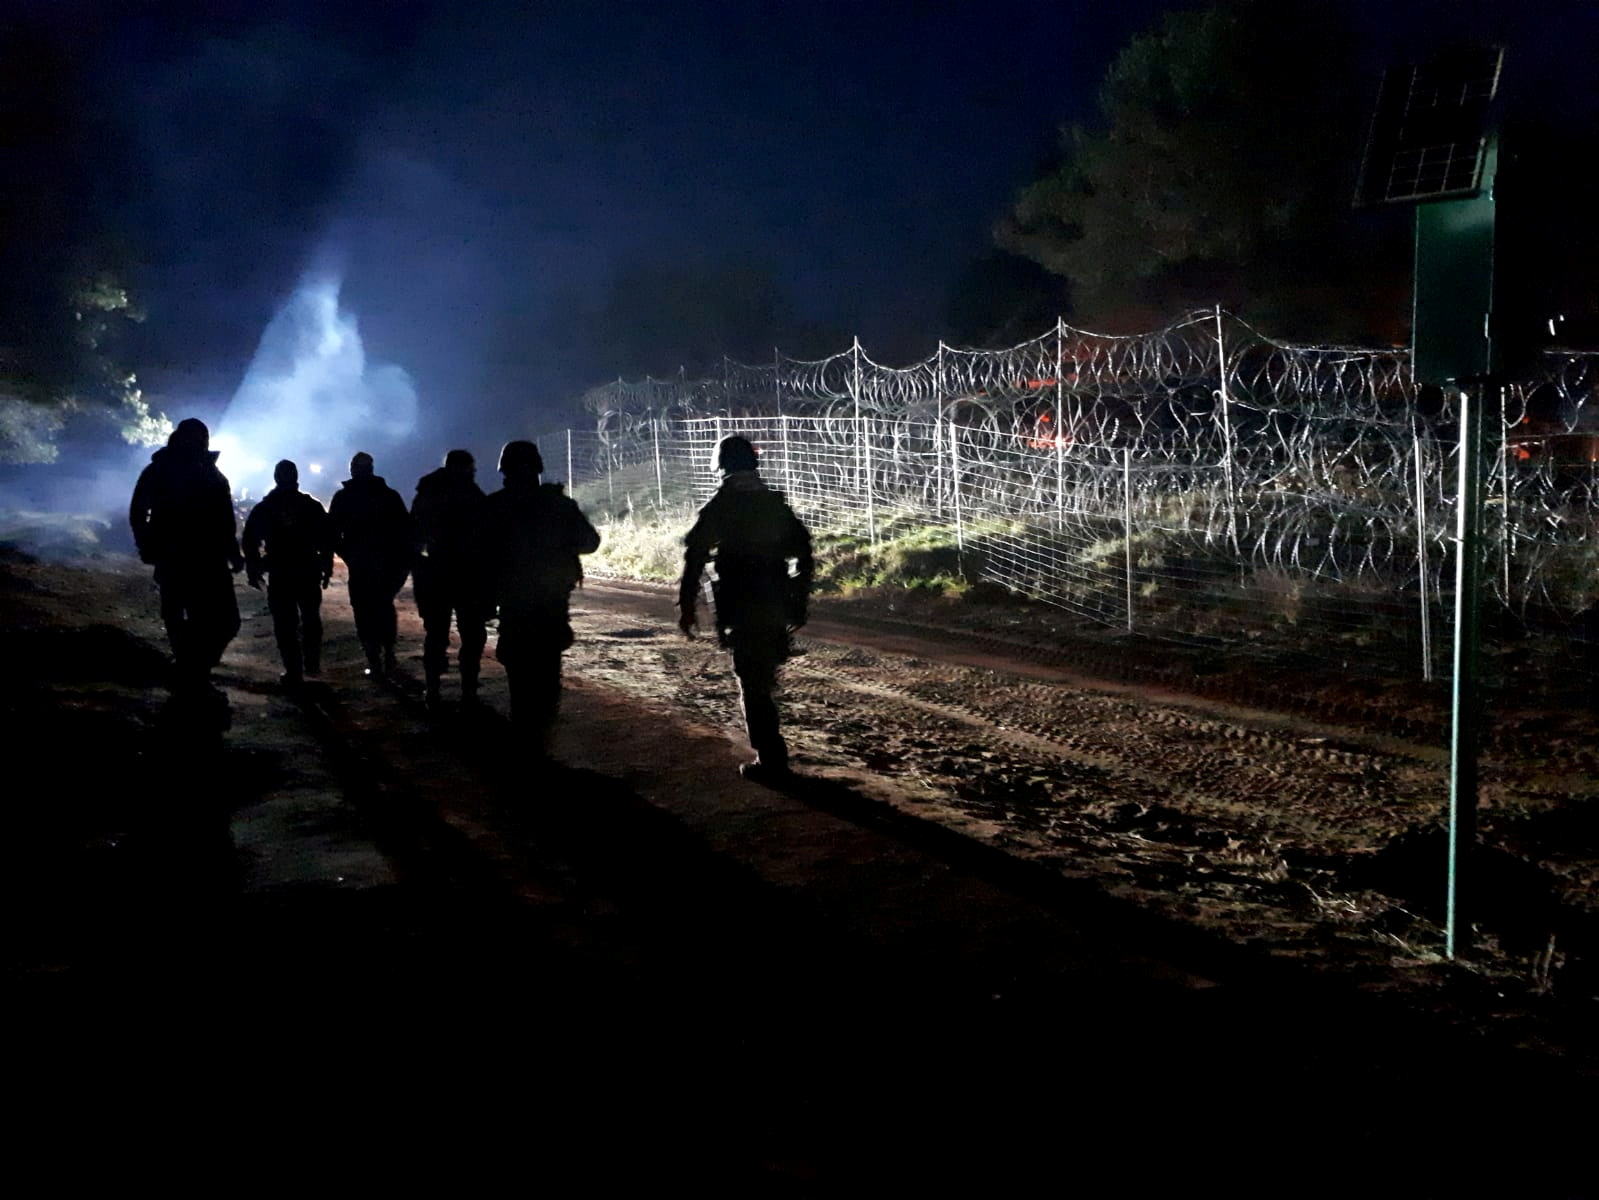 Polish soldiers patrol Poland/Belarus border near Kuznica, Poland, in this photograph released by the Polish Ministry of Defence, November 11, 2021. MON/Handout via REUTERS